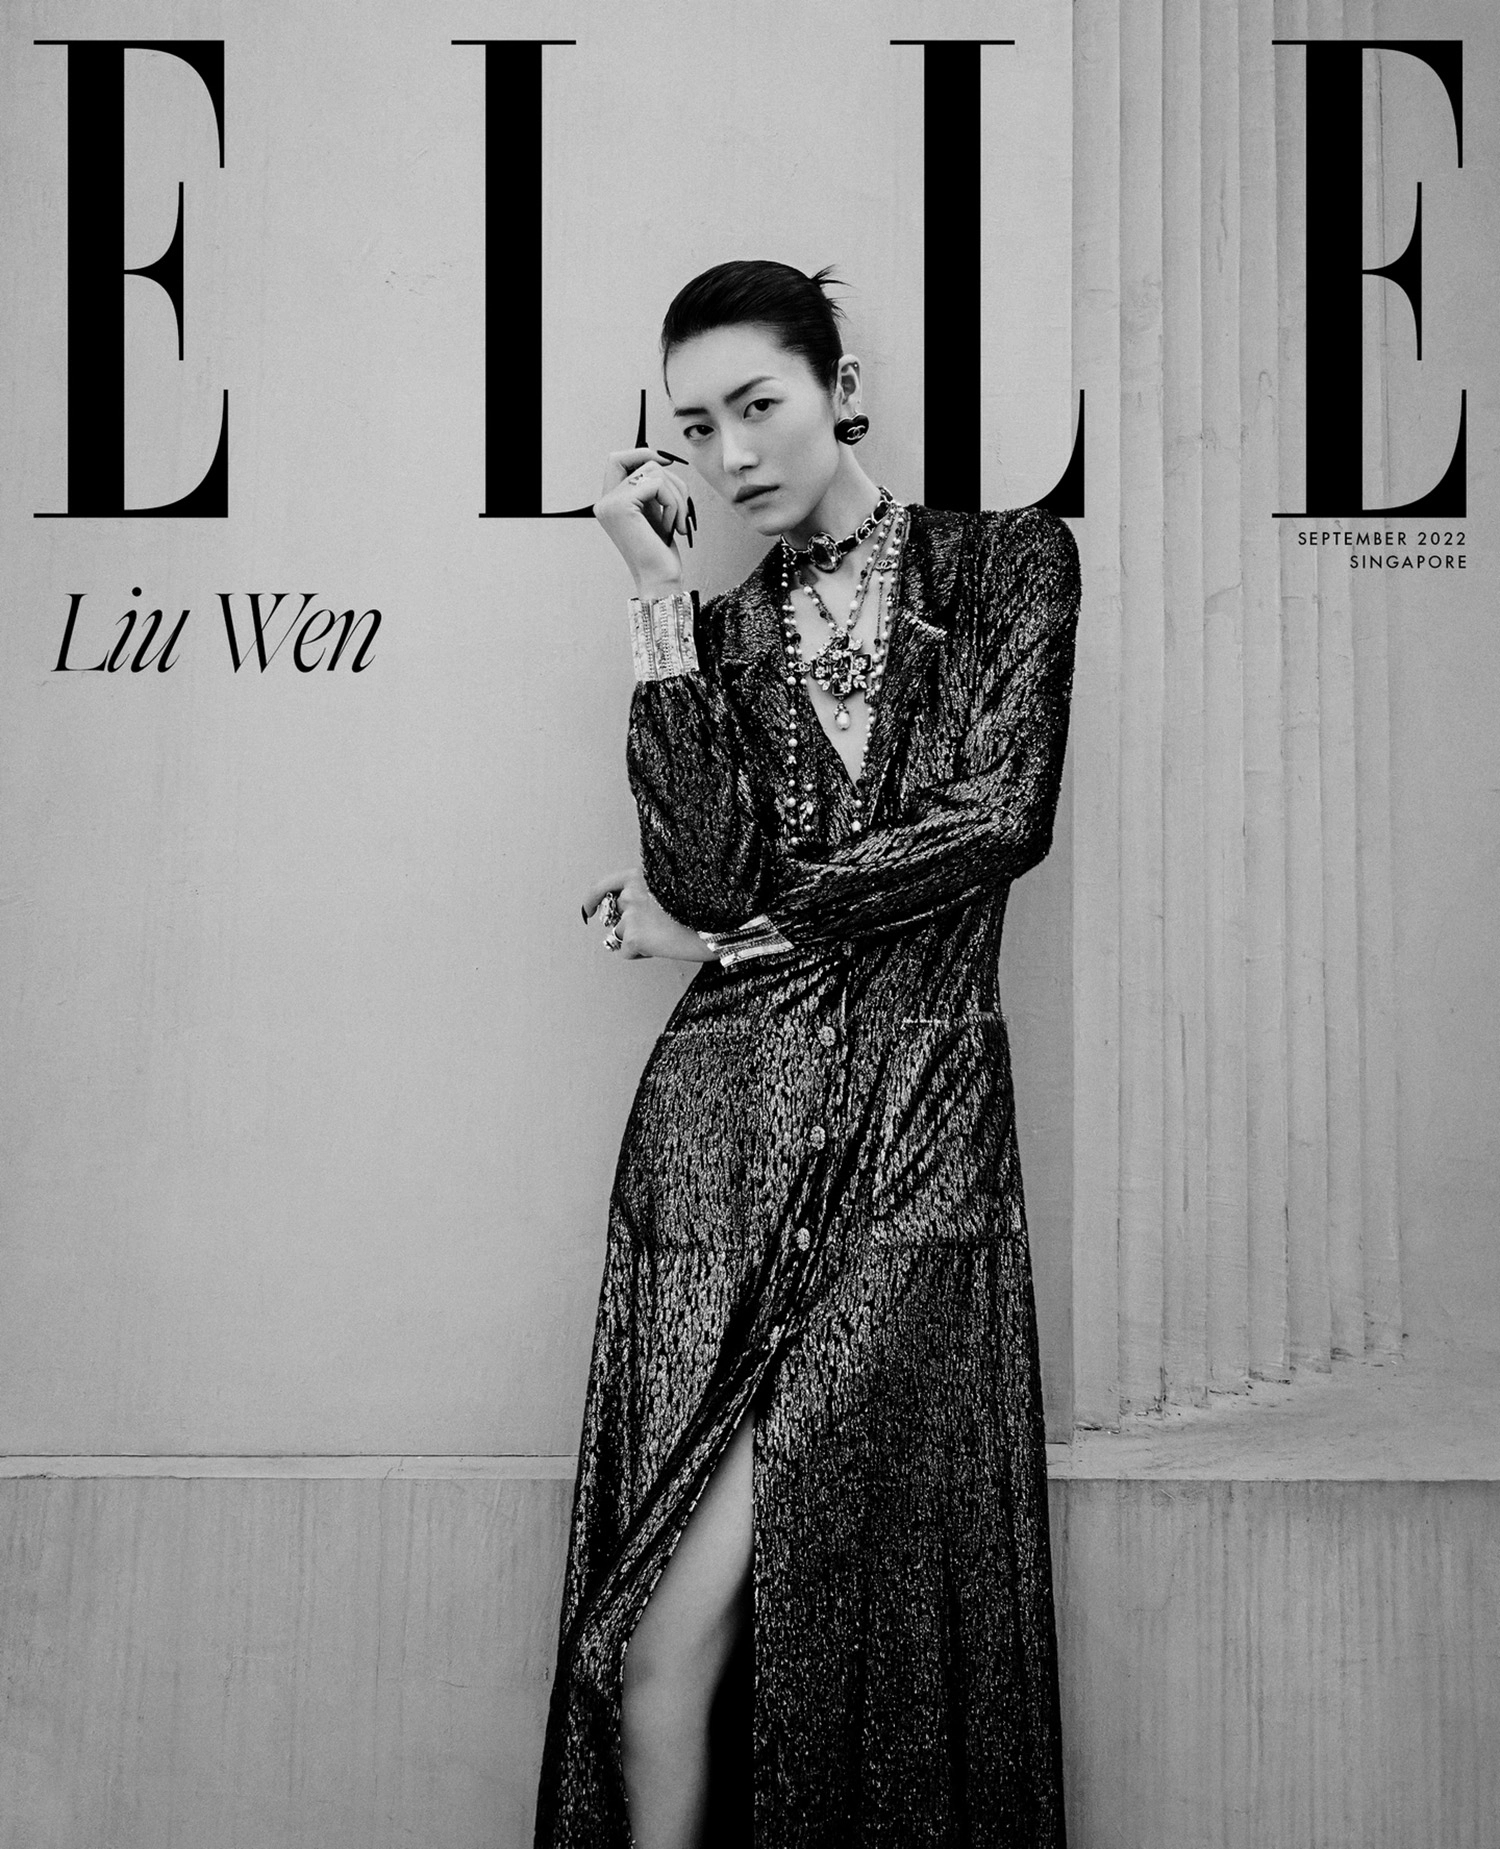 Liu Wen in Chanel on Elle Singapore September 2022 covers by Yu Cong